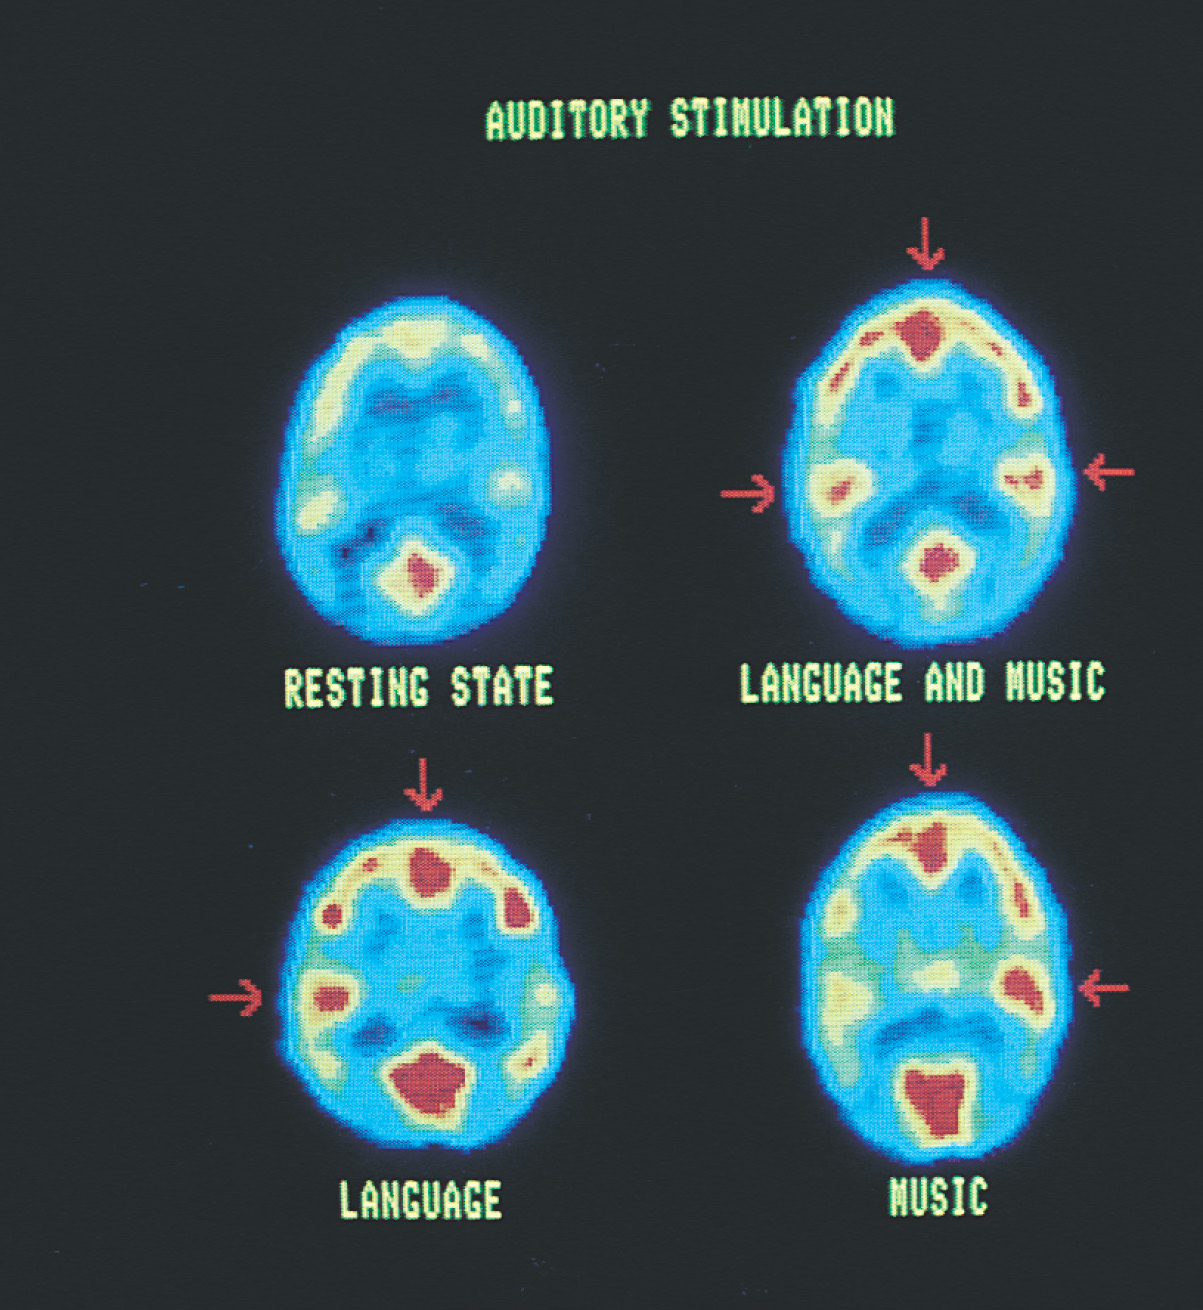 Brain scans: 4 views show auditory stimulation for a resting state, language and music, language only, and music only. 